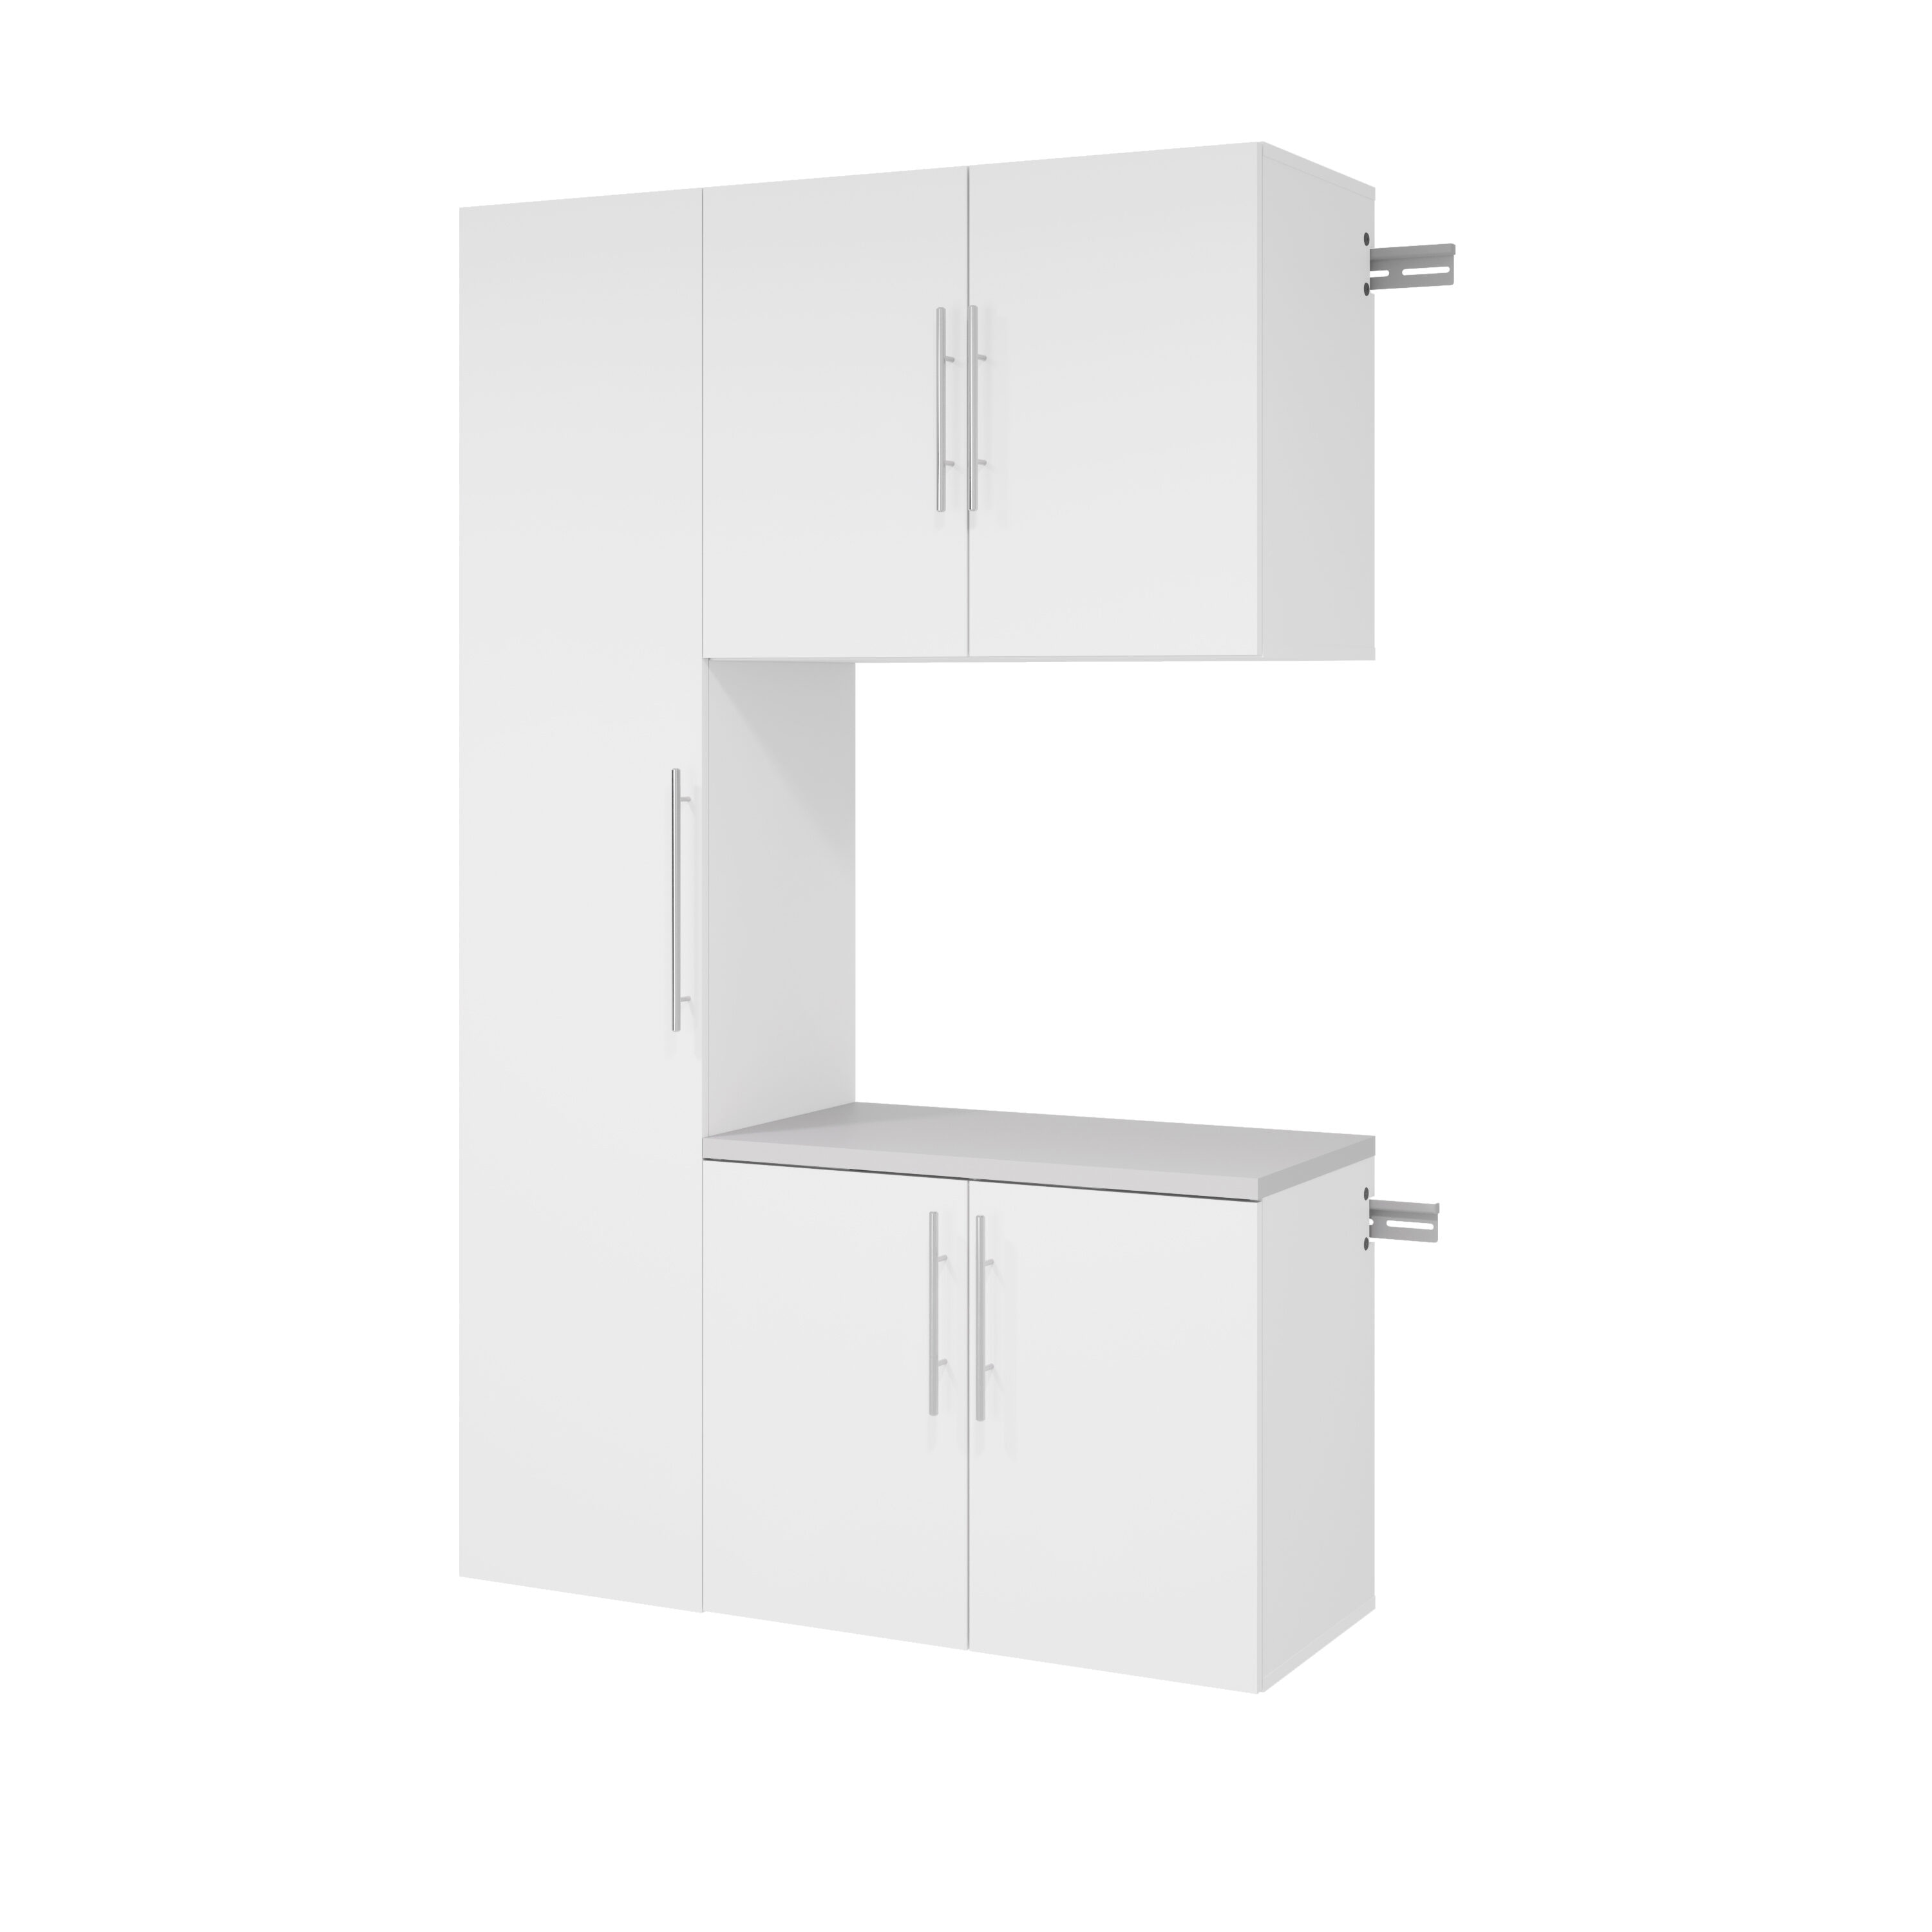 3-Cabinets Composite Wood Garage Storage System in White Hangups (45-in W x 72-in H) | - Prepac WRGW-0716-3M